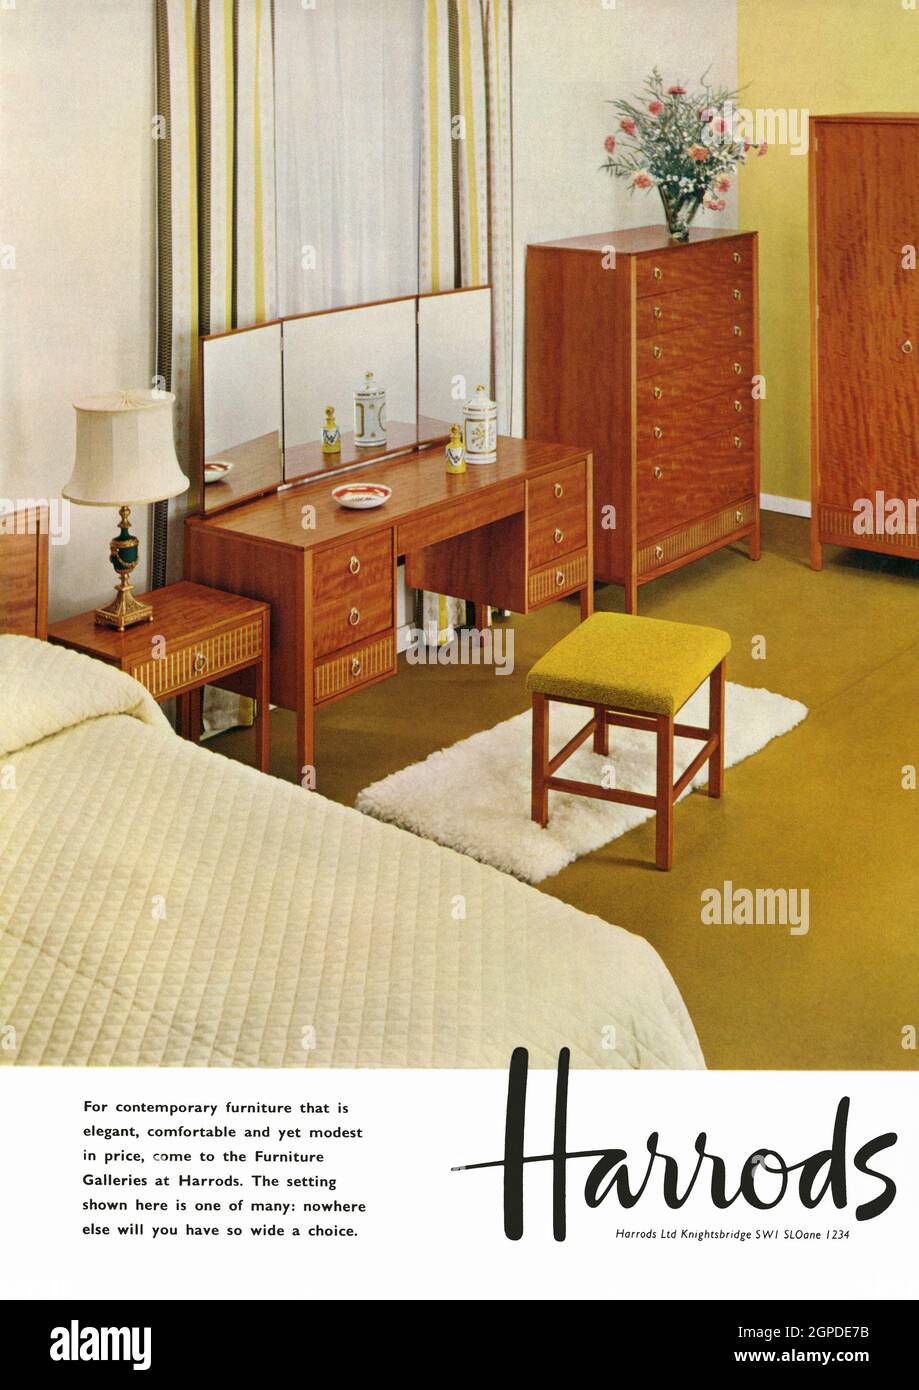 A 1960s advert for Harrods of Knightsbridge, London, England, UK. The advert appeared in a magazine published in the UK in October 1962. It features a photograph of mid-century modern bedroom furniture from the upmarket department store, plus the distinctive Harrods logo – vintage 1960s graphics. Stock Photo